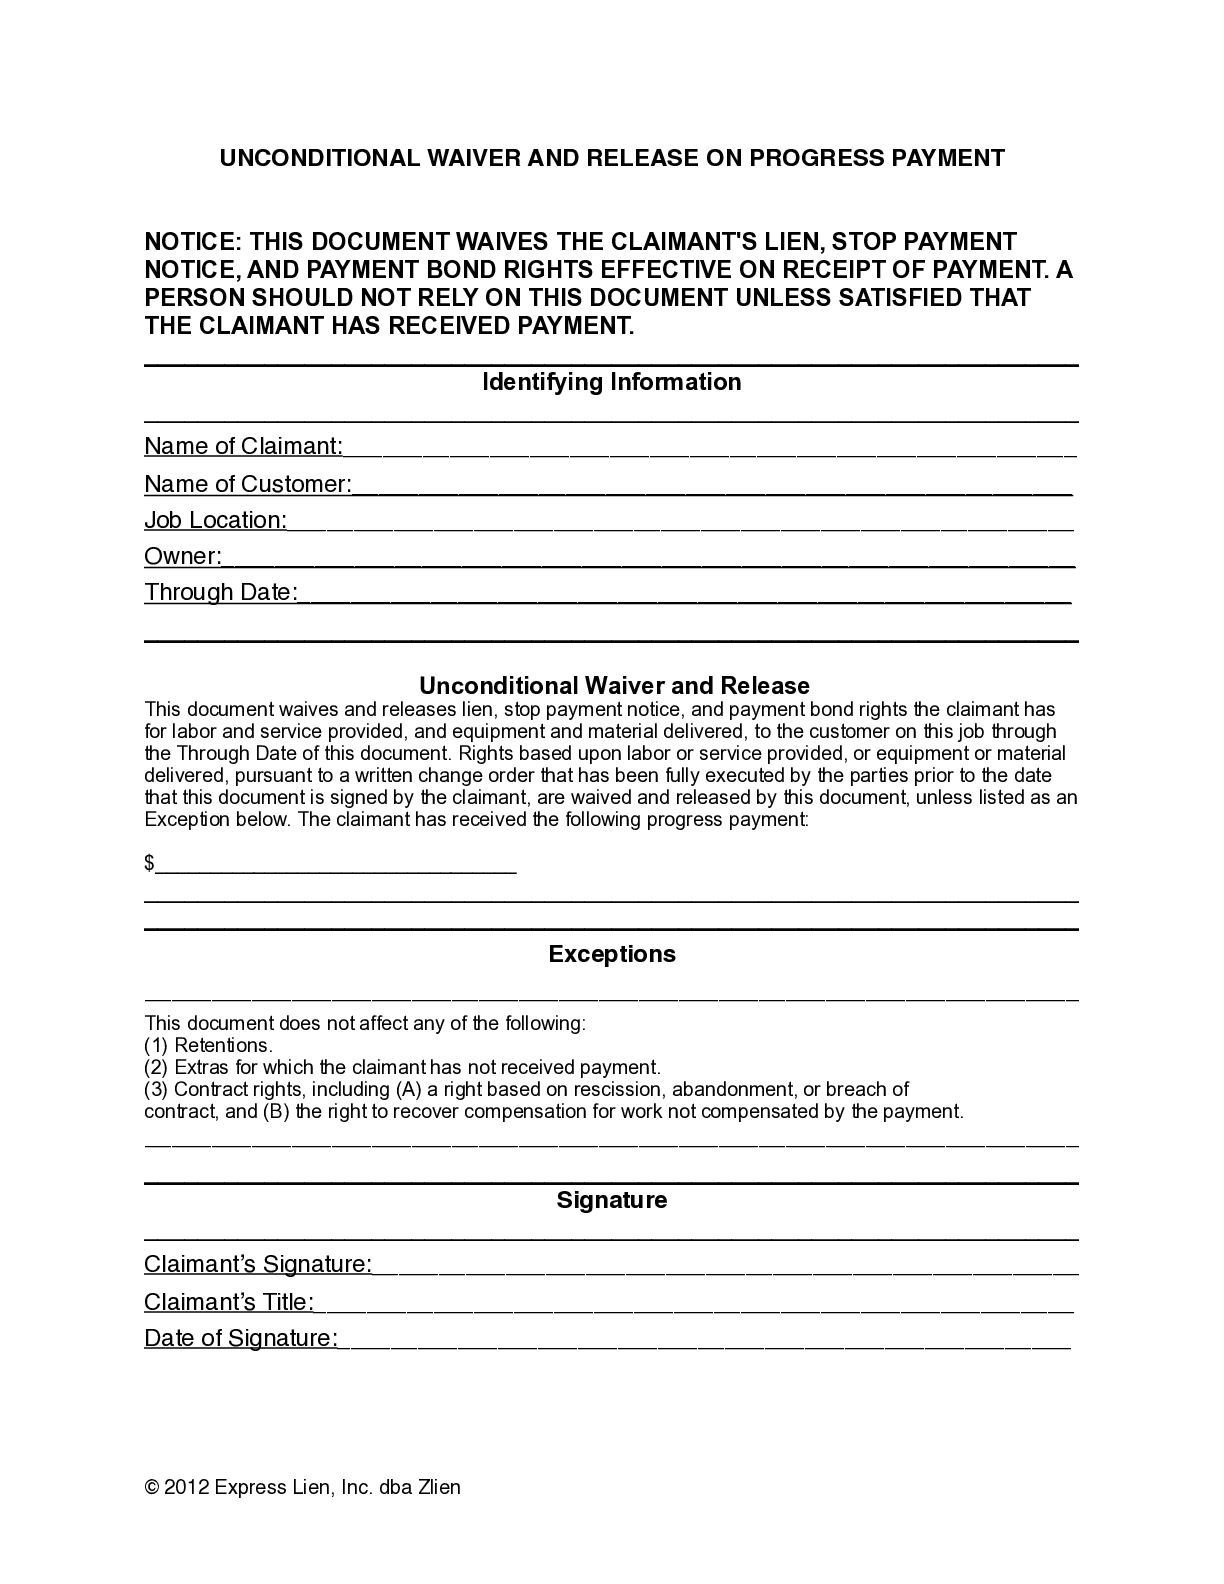 Alaska Partial Unconditional Lien Waiver Form - free from